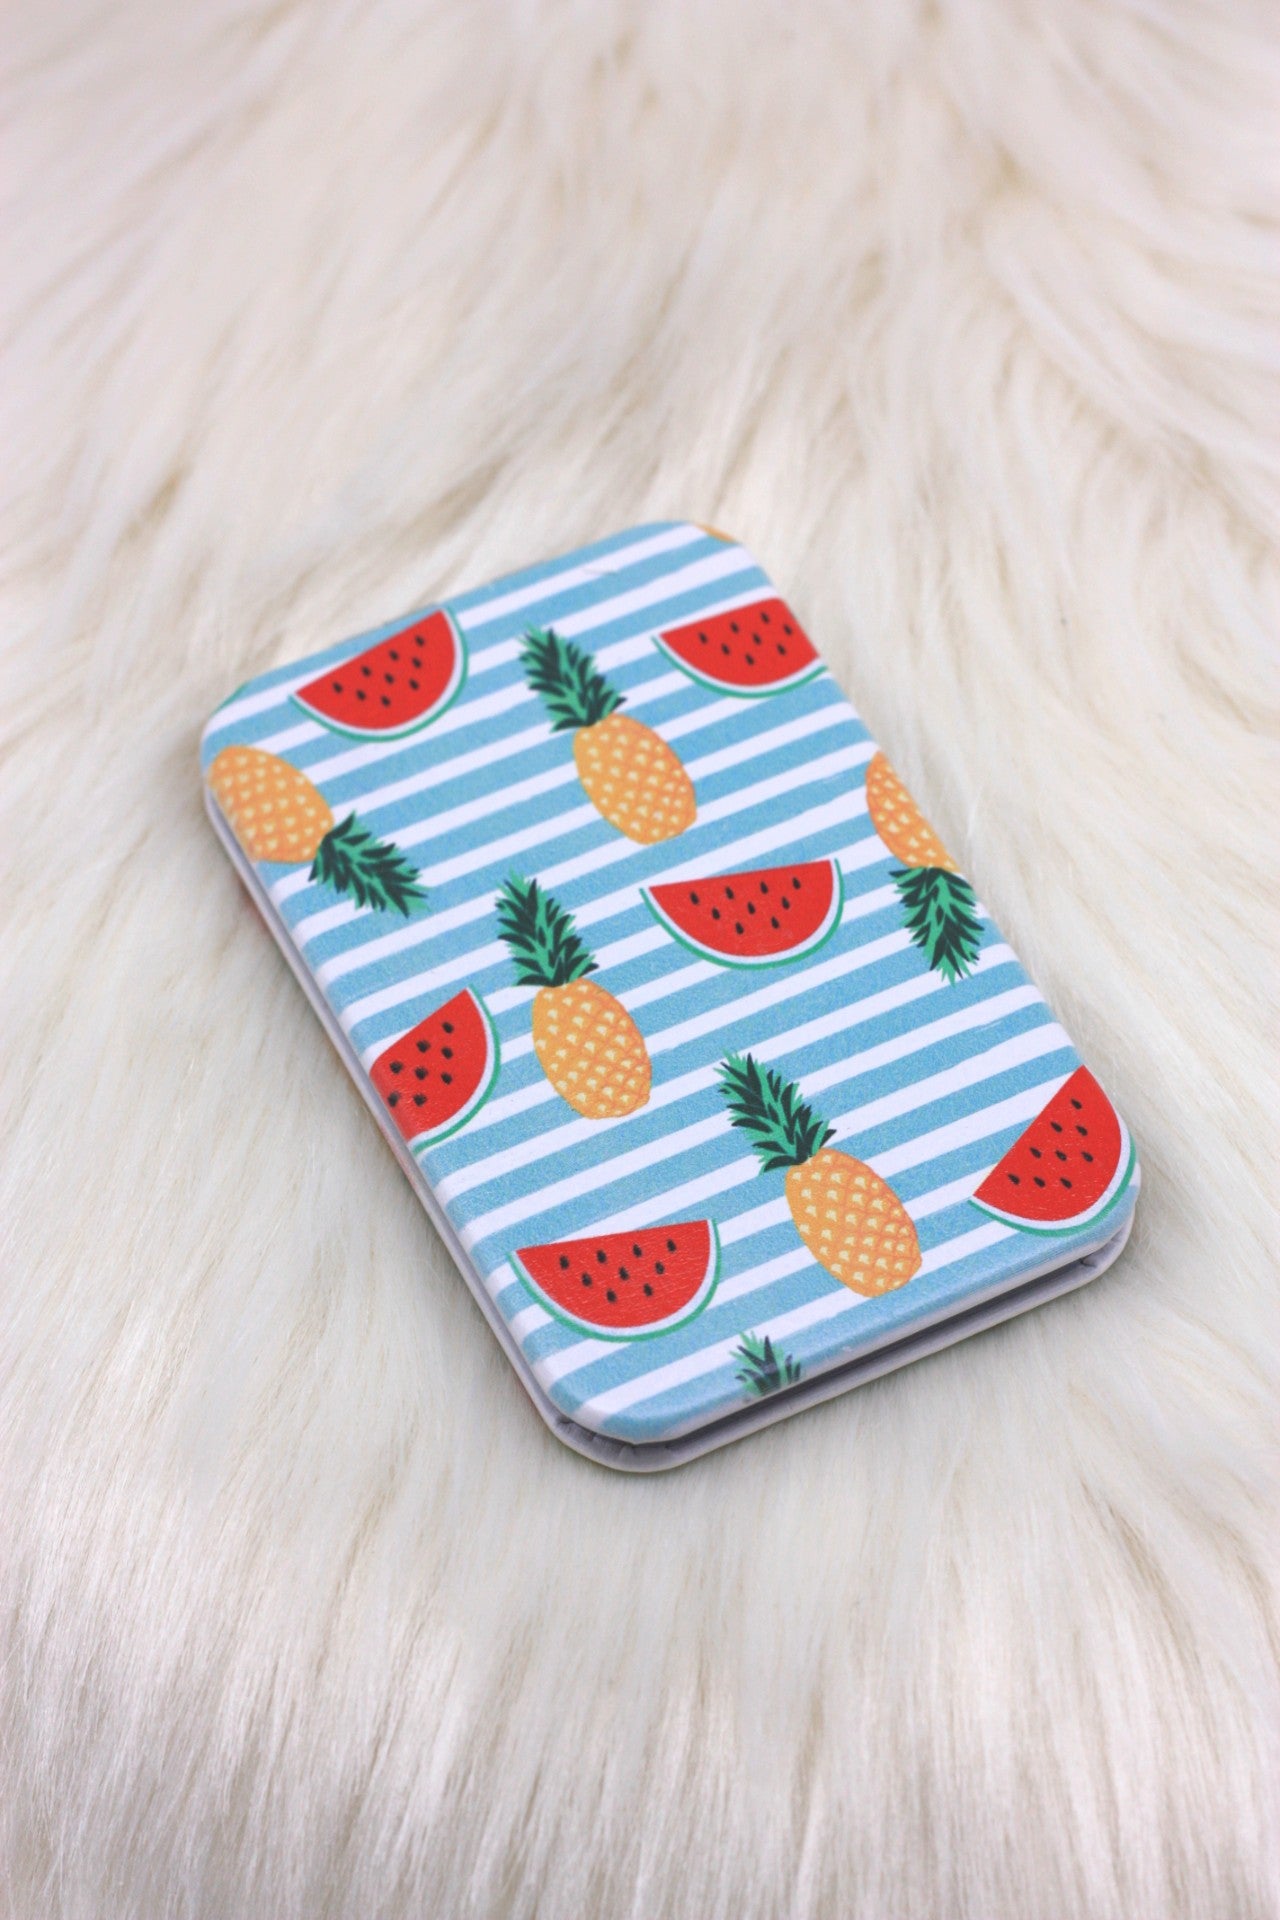 Pineapple and Watermelon Compact Mirror - ChicMela